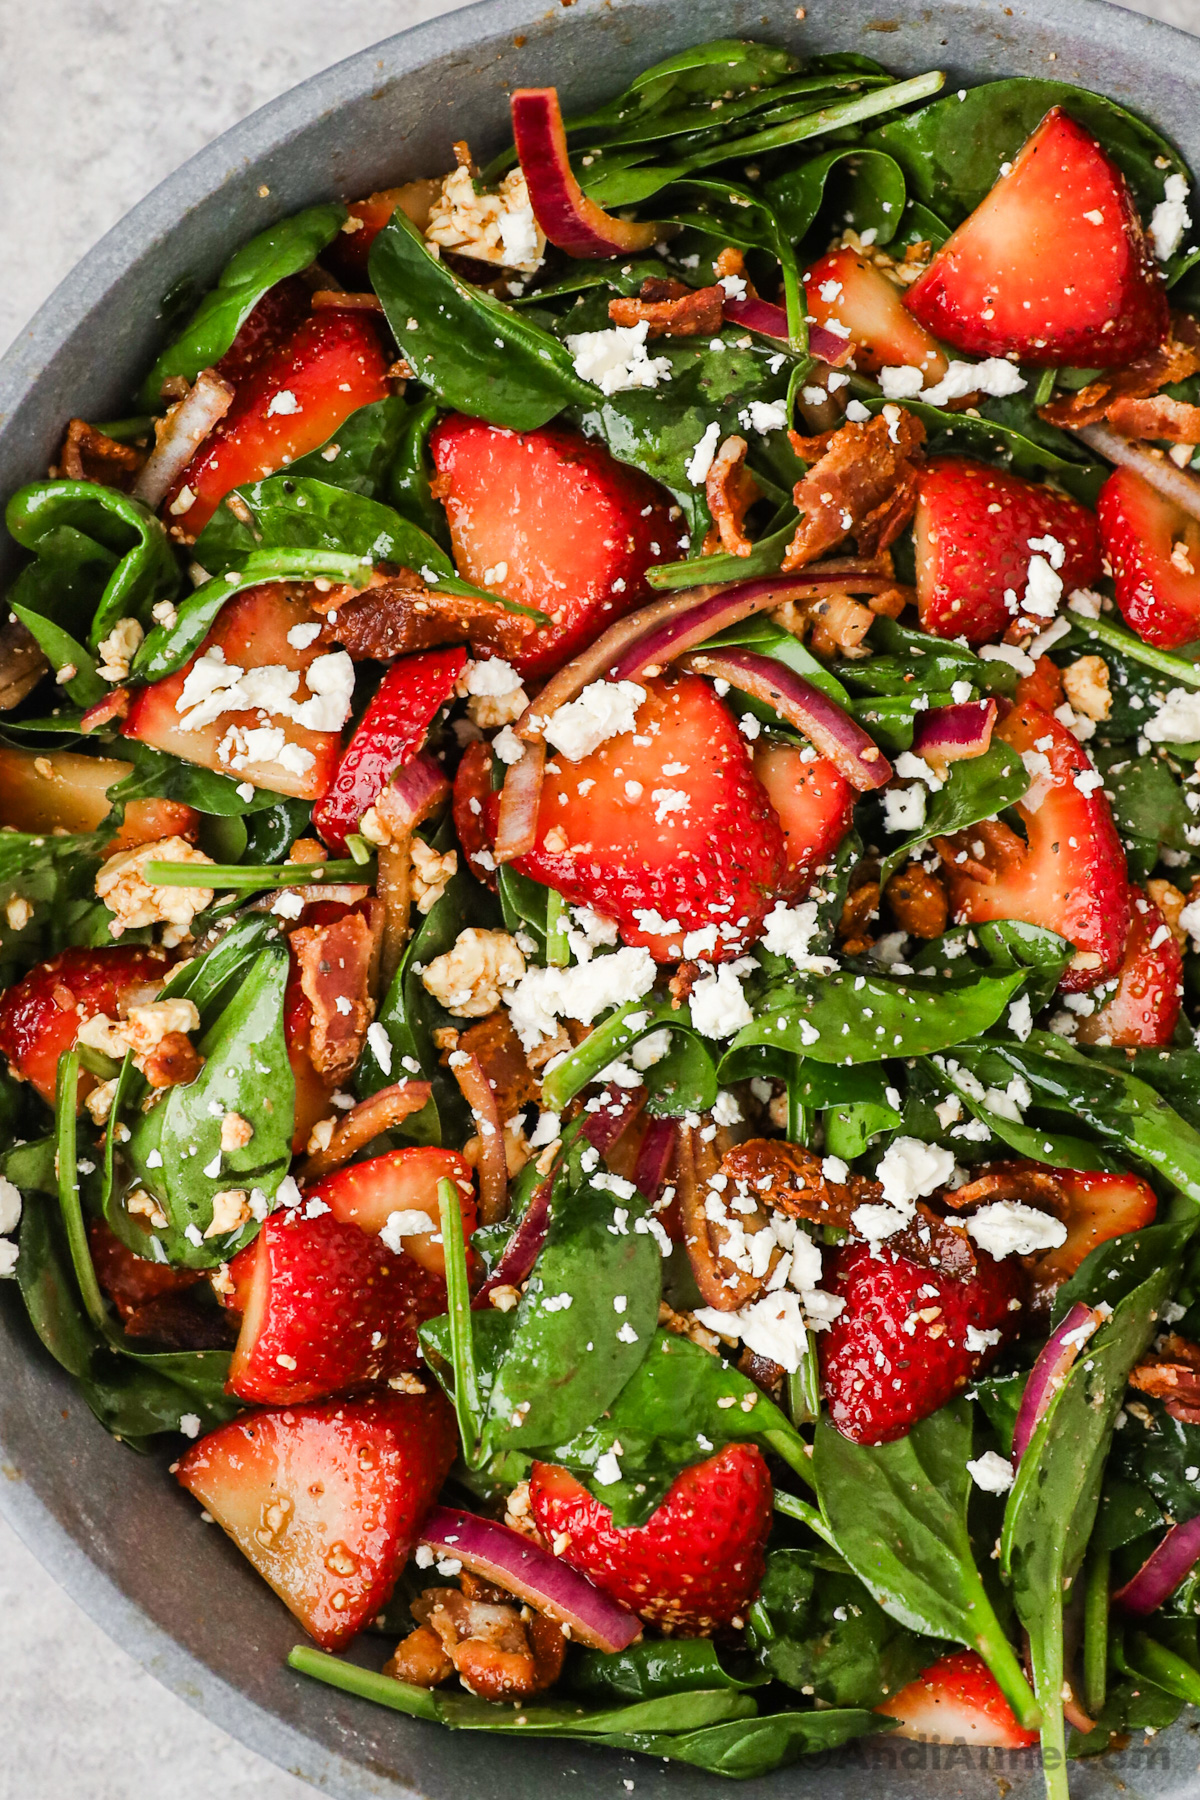 A bowl of strawberry spinach salad with crumbled feta, red onion slices and bacon pieces.